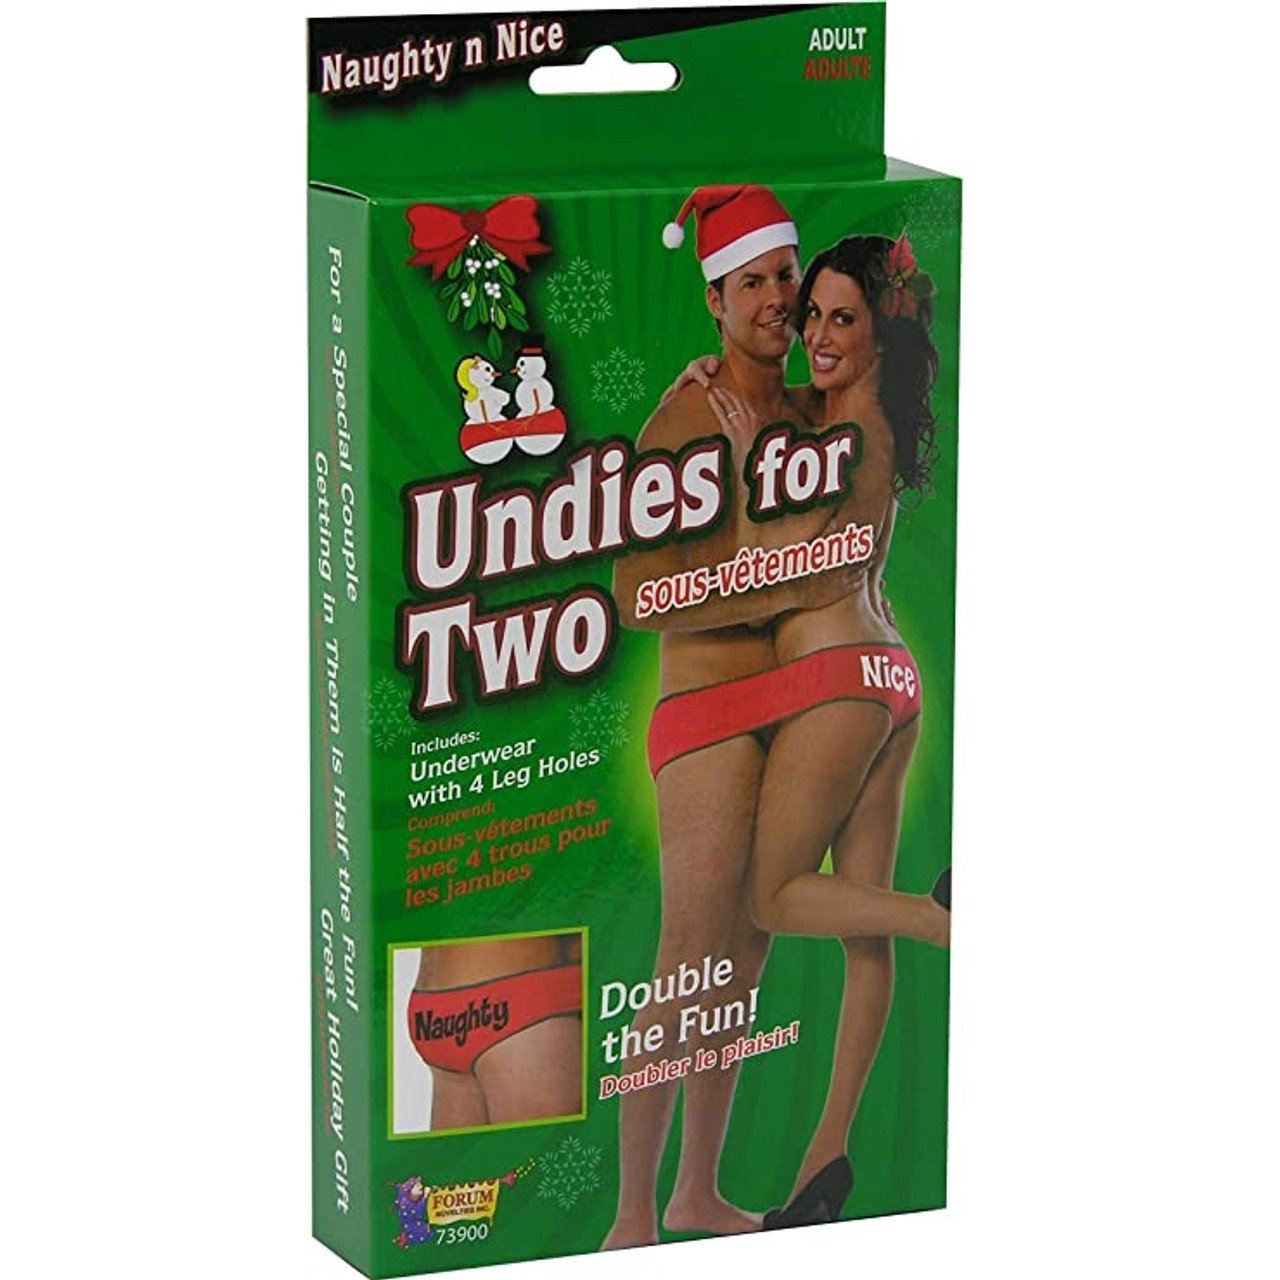 Undies For Two With 4 Leg Holes Adult Women's Men's Gag Gift Novelty  Underwear